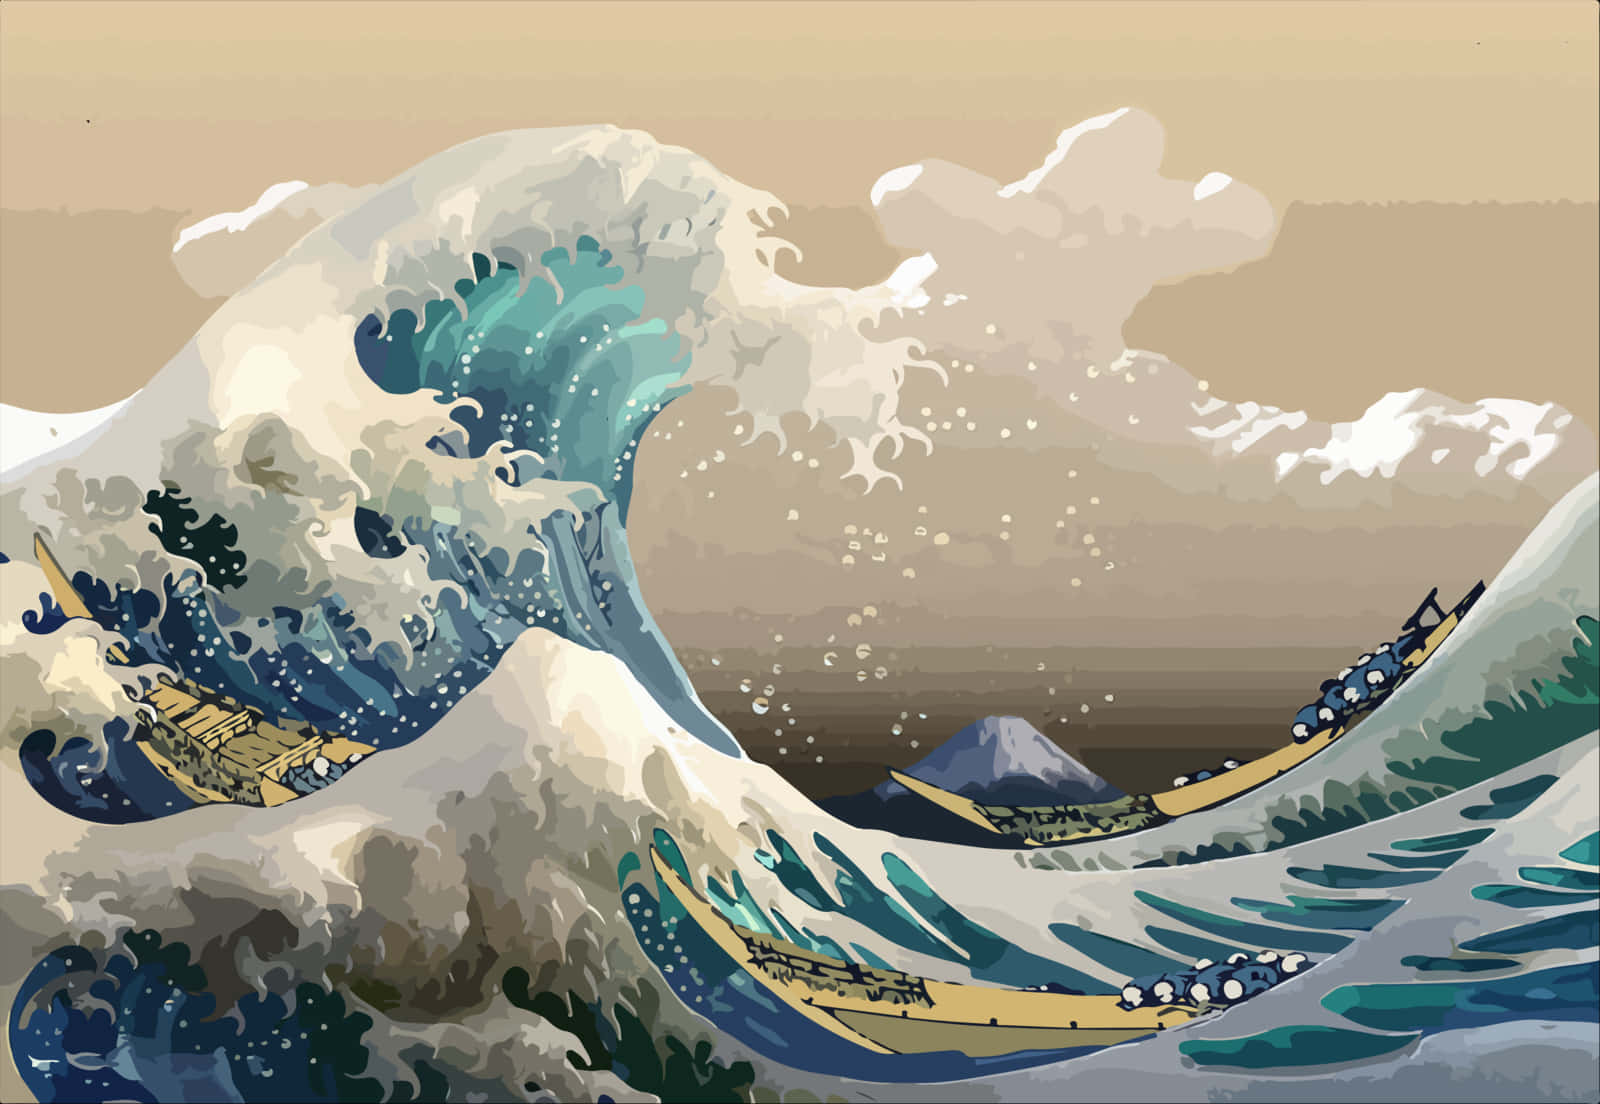 Aesthetic Art Of The Great Wave Wallpaper